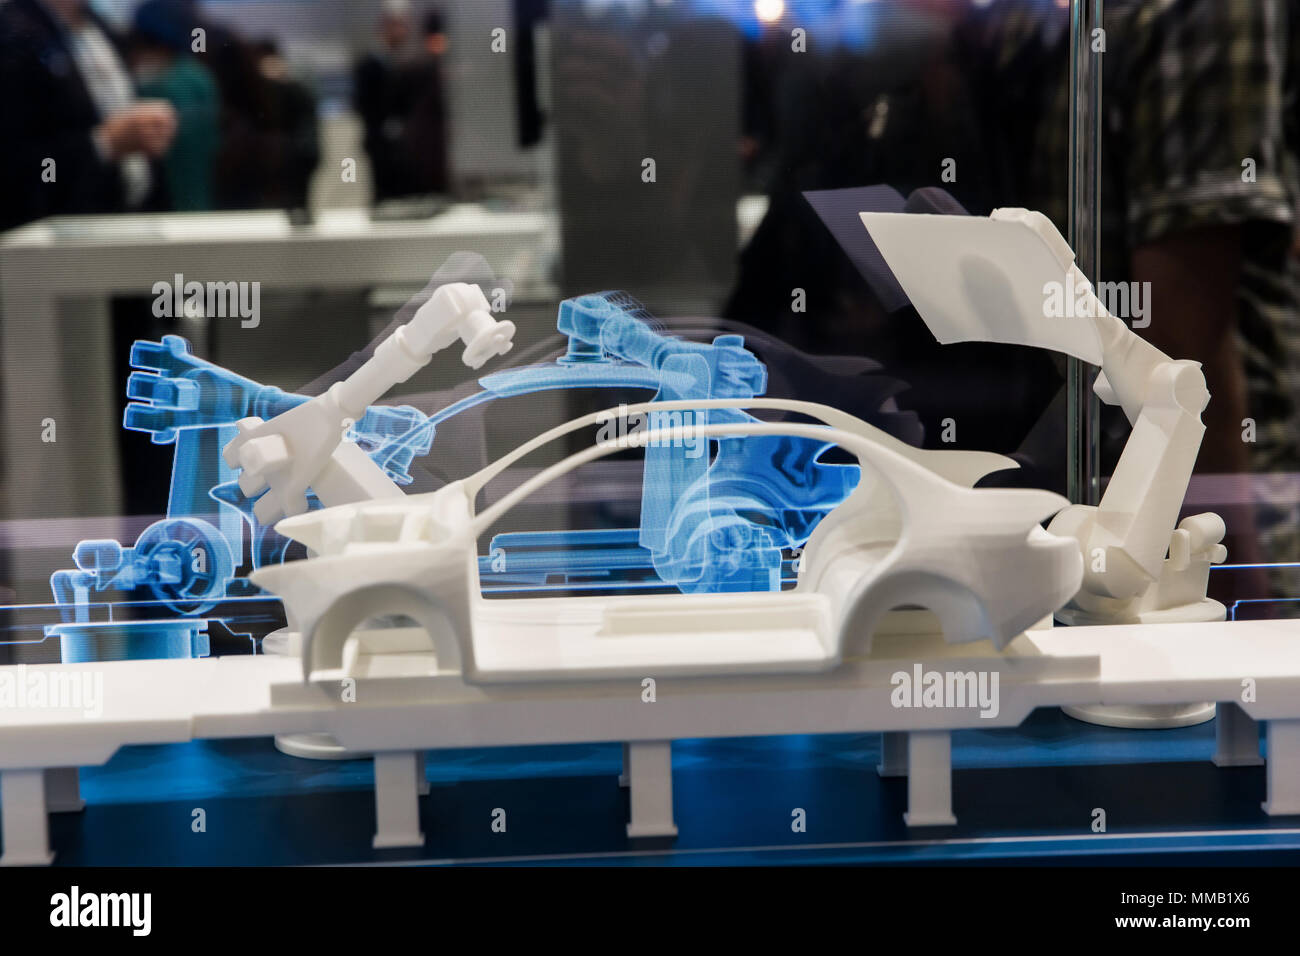 Hannover, Germany - April, 2018: Simulating of car manufacturing by robots, digital twin of the production on Siemens stand on Messe fair in Hannover, Stock Photo